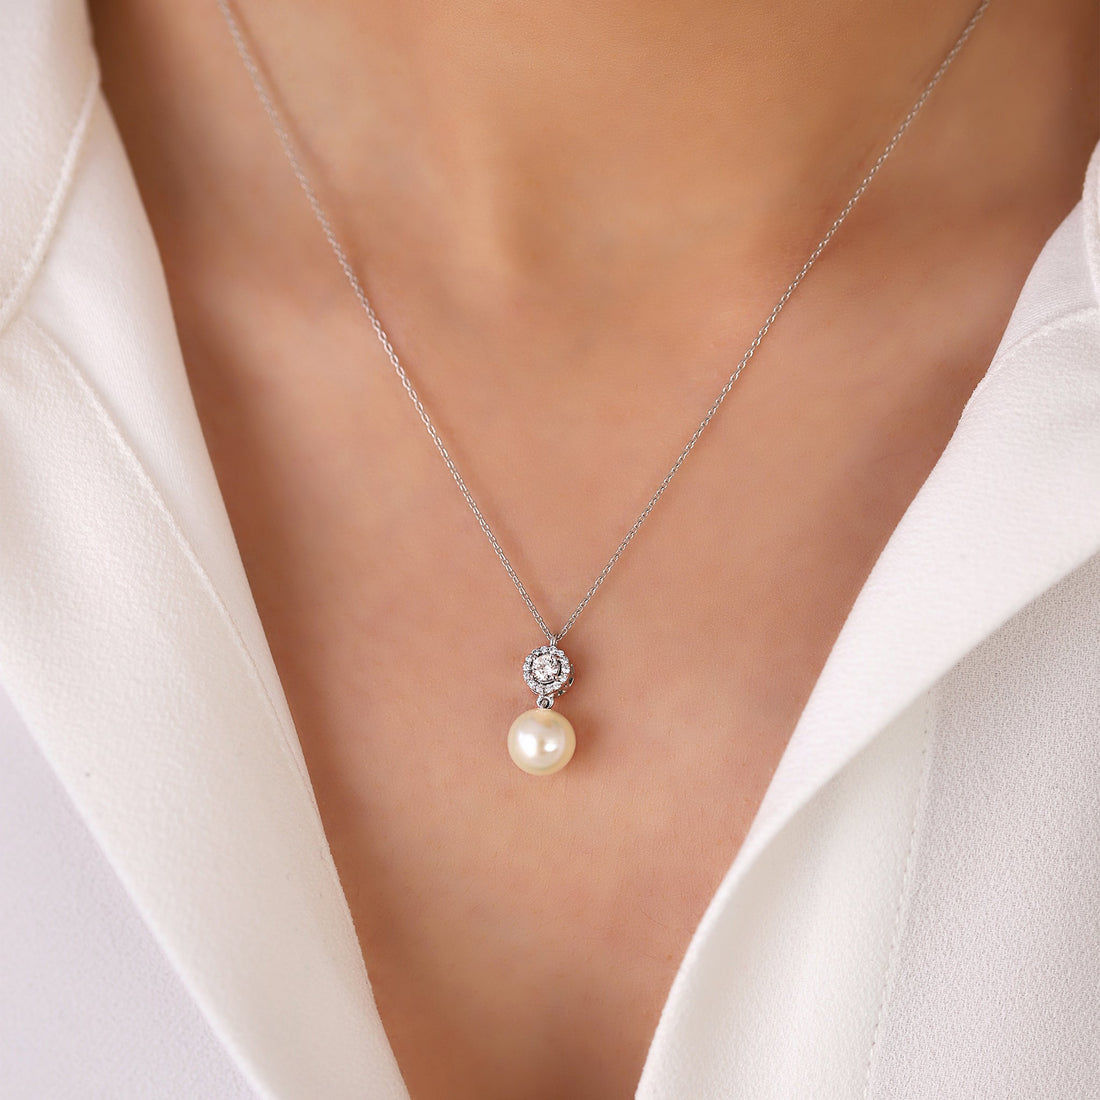 Jewelry Pearls | Diamond Pendant | 0.19 Cts. | 14K Gold - White / 40 - 43 Cm / necklace Zengoda Shop online from